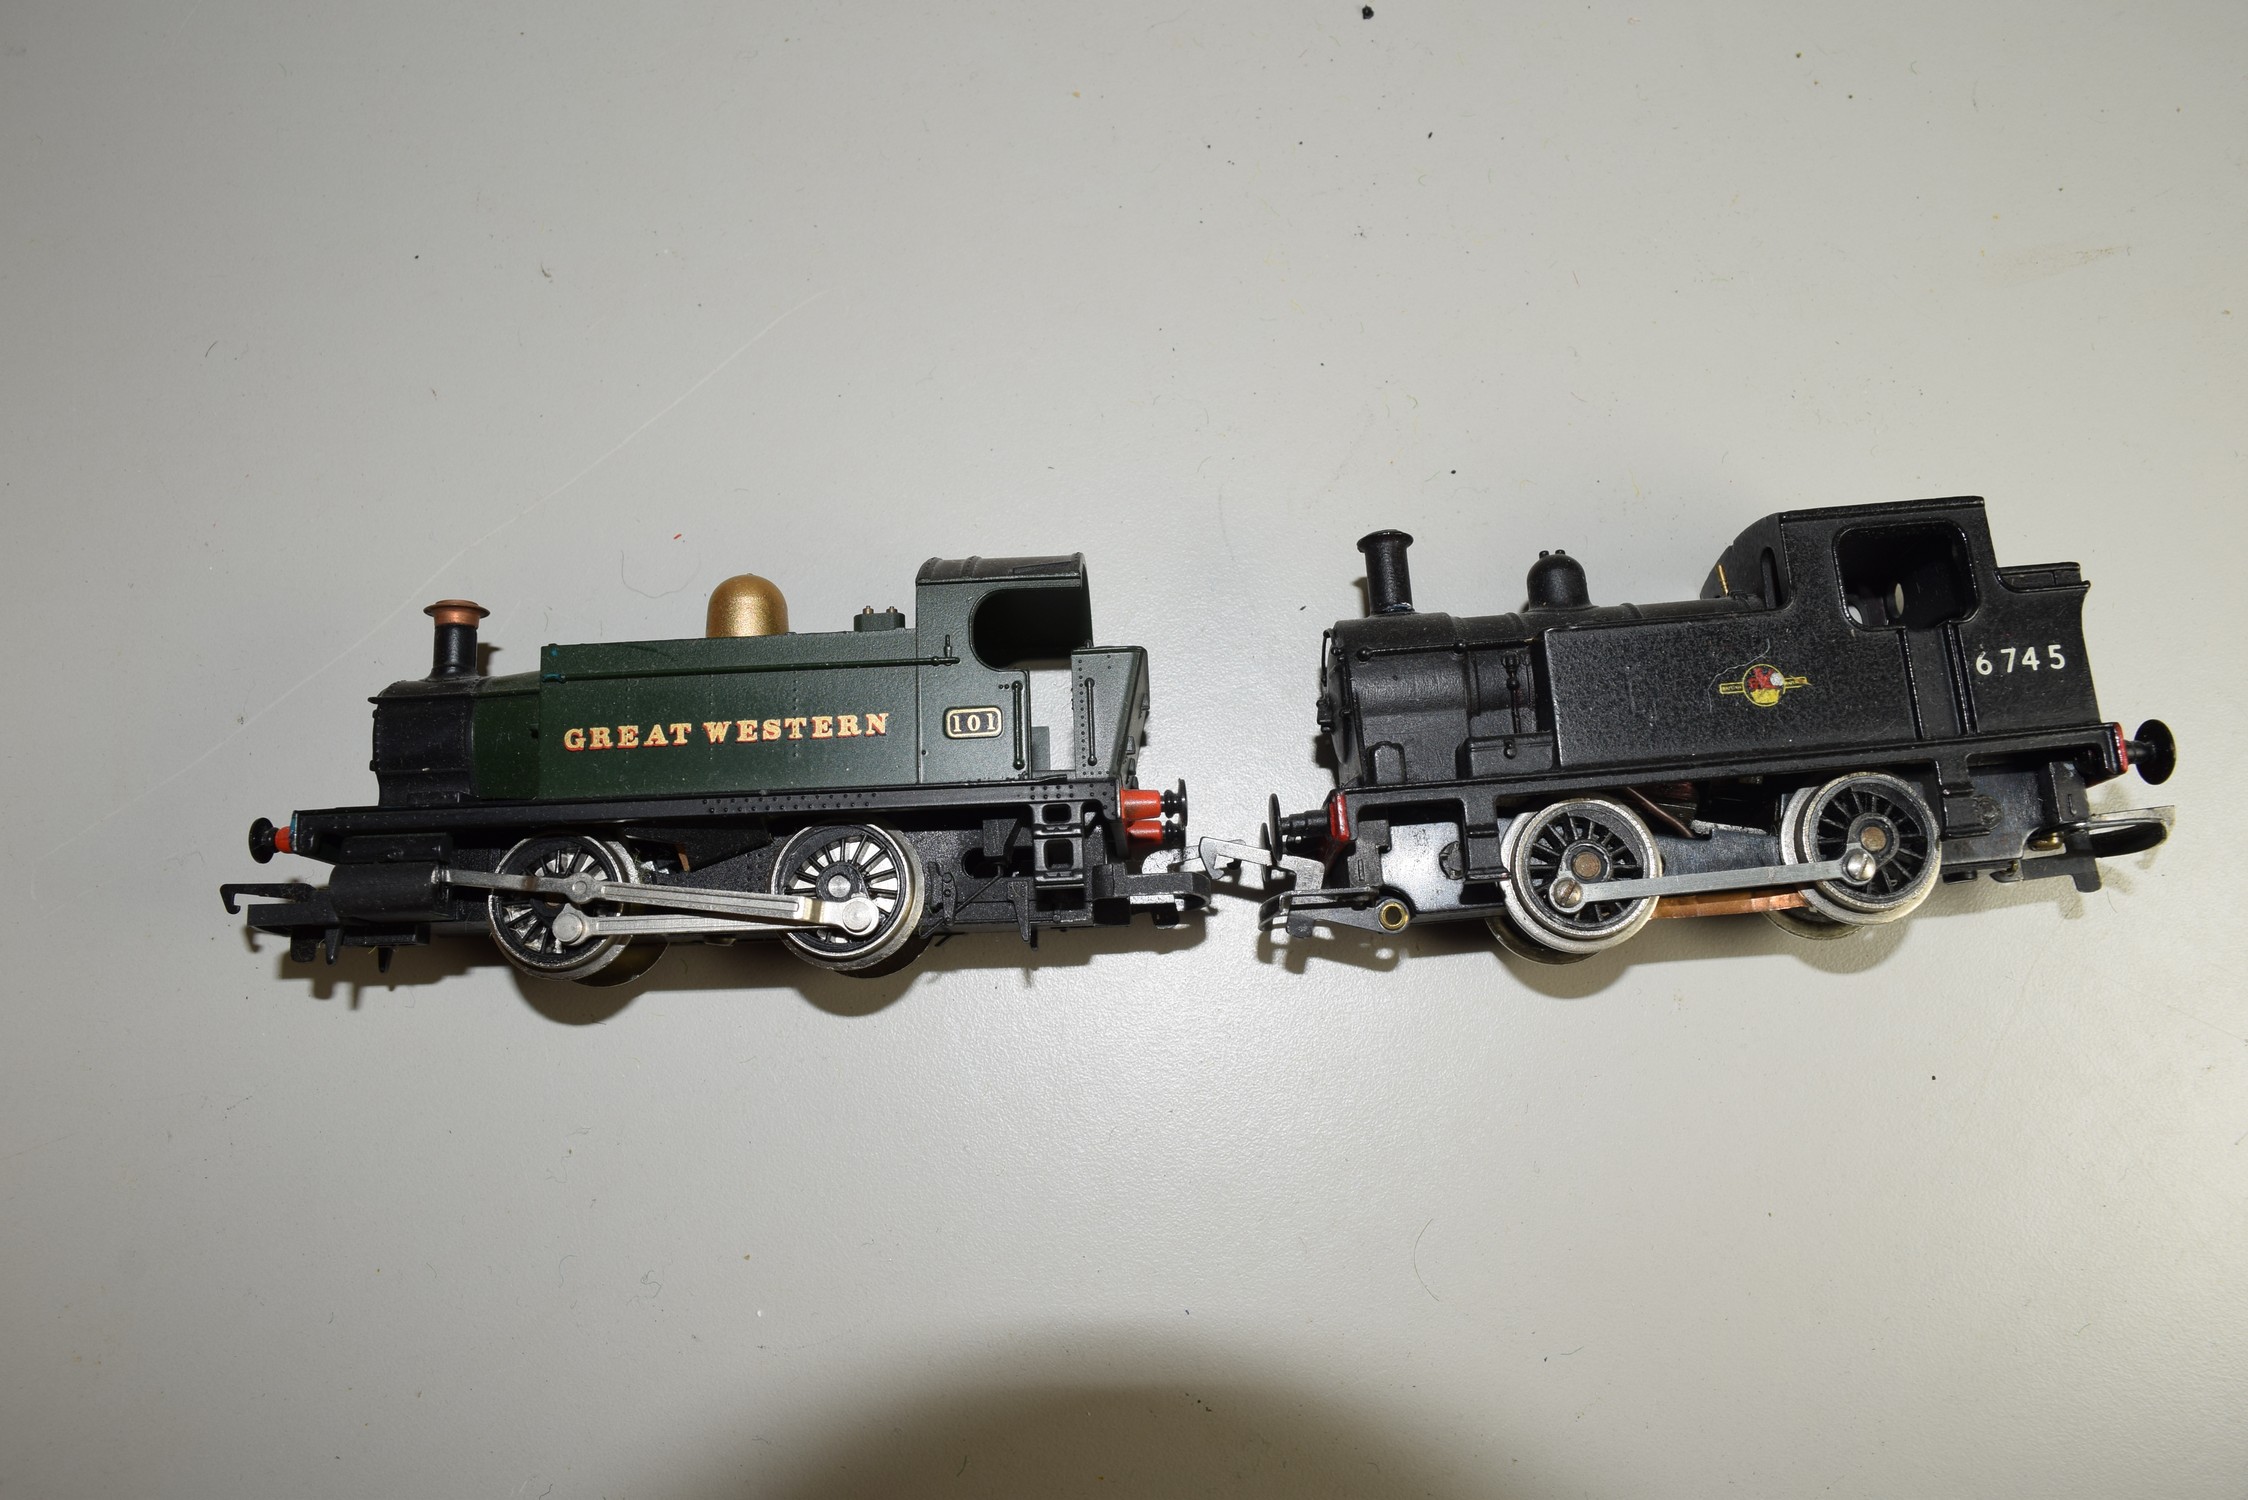 Unboxed 00 gauge Hornby GW locomotive no 101, together with a Triang loco no 6745